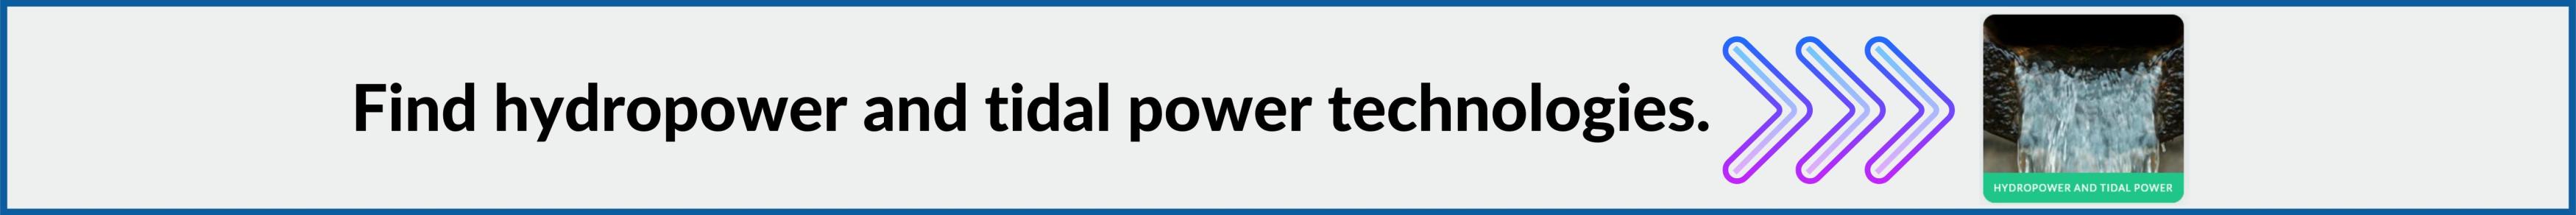 Find hydropower and tidal power technologies here